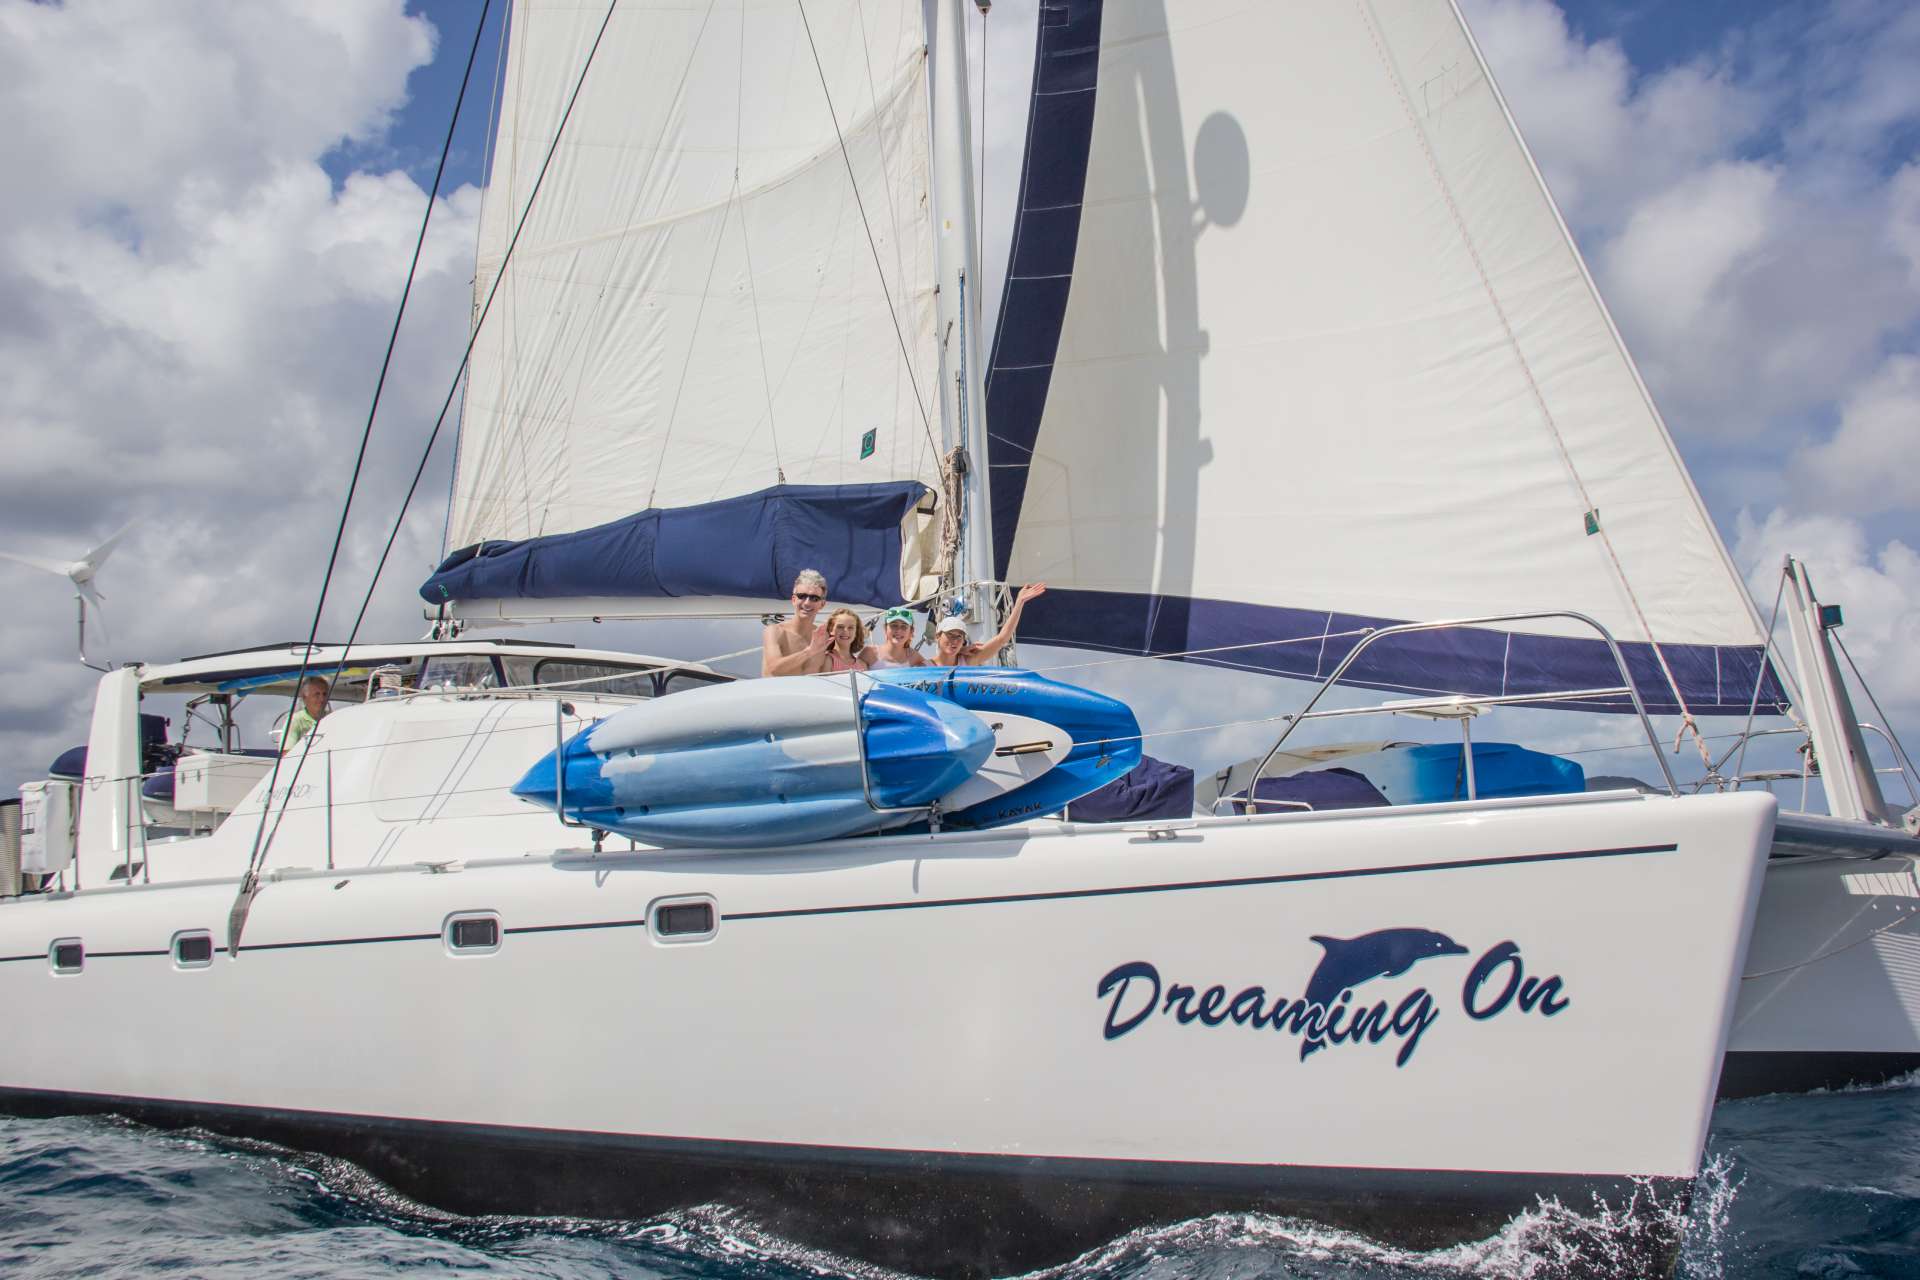 dreaming on - Boat hire worldwide & Boat hire in Central america, Belize 2